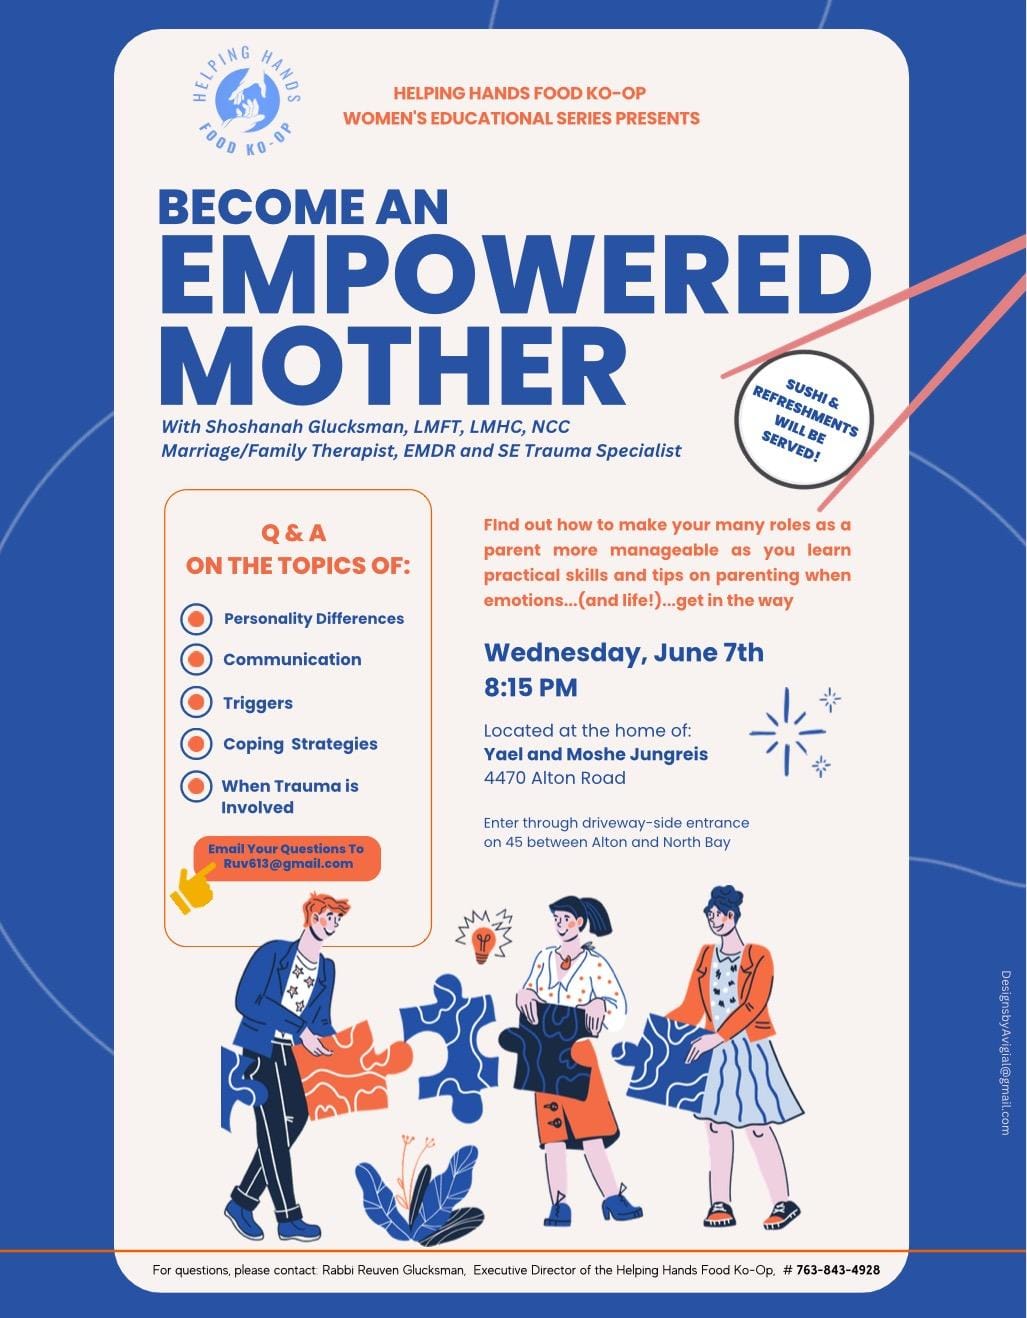 Become an Empowered Mother